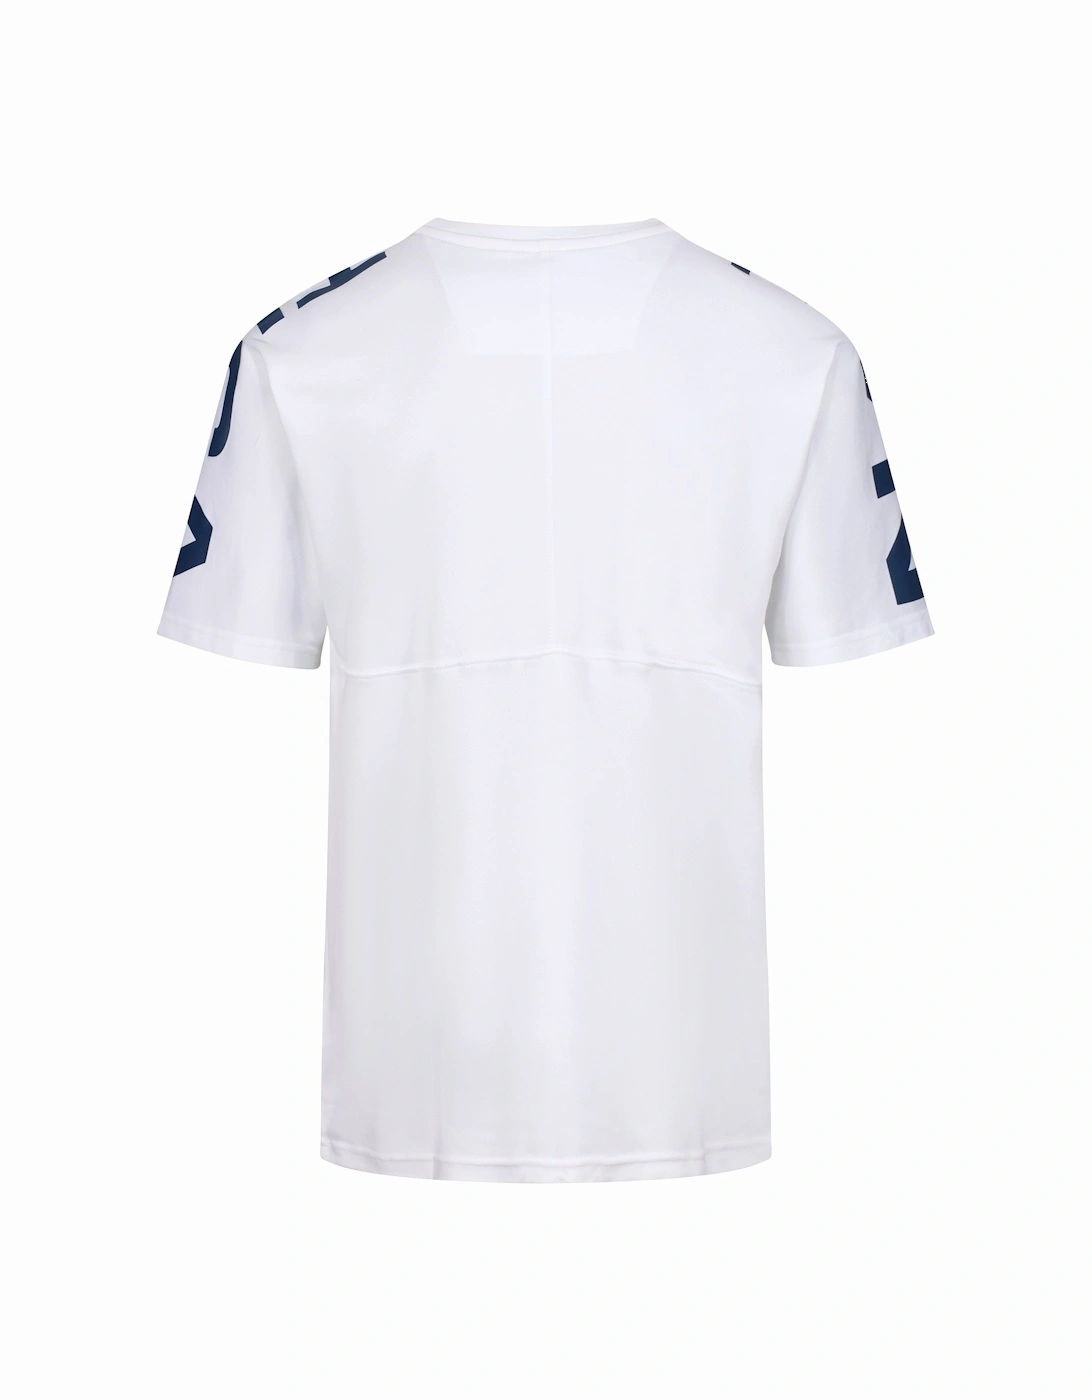 Dinghy Competition T-Shirt | White